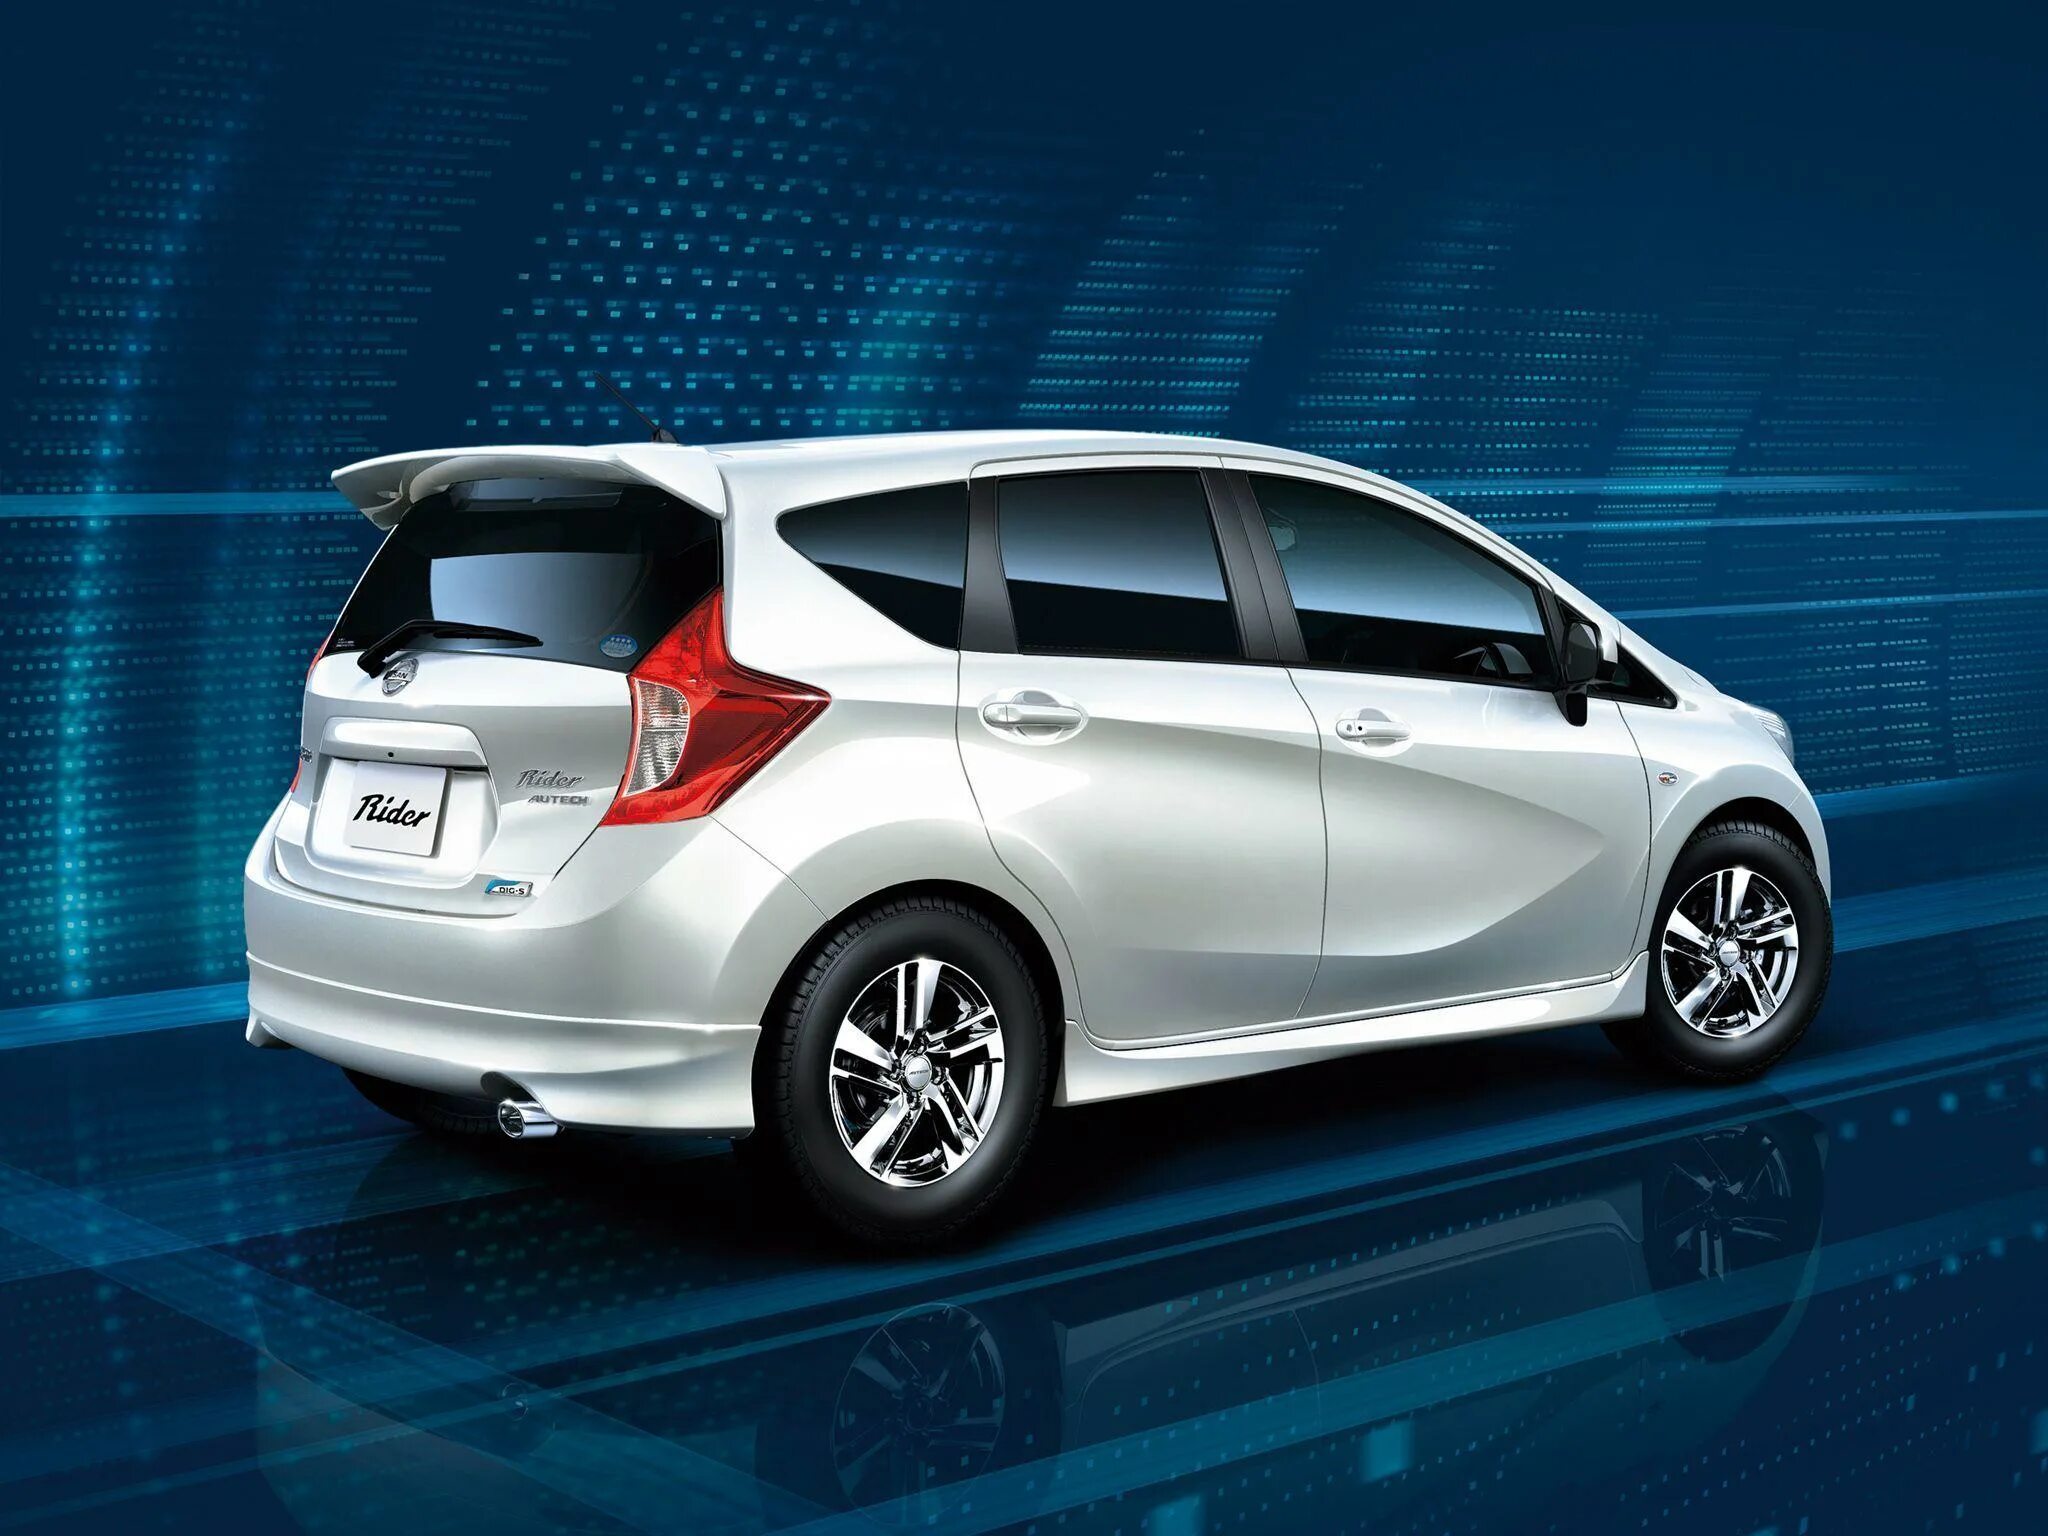 Note 12 speed. Nissan Note e12 Rider. Nissan Note e12 2014. Nissan Note II (e12). Nissan Note 12.